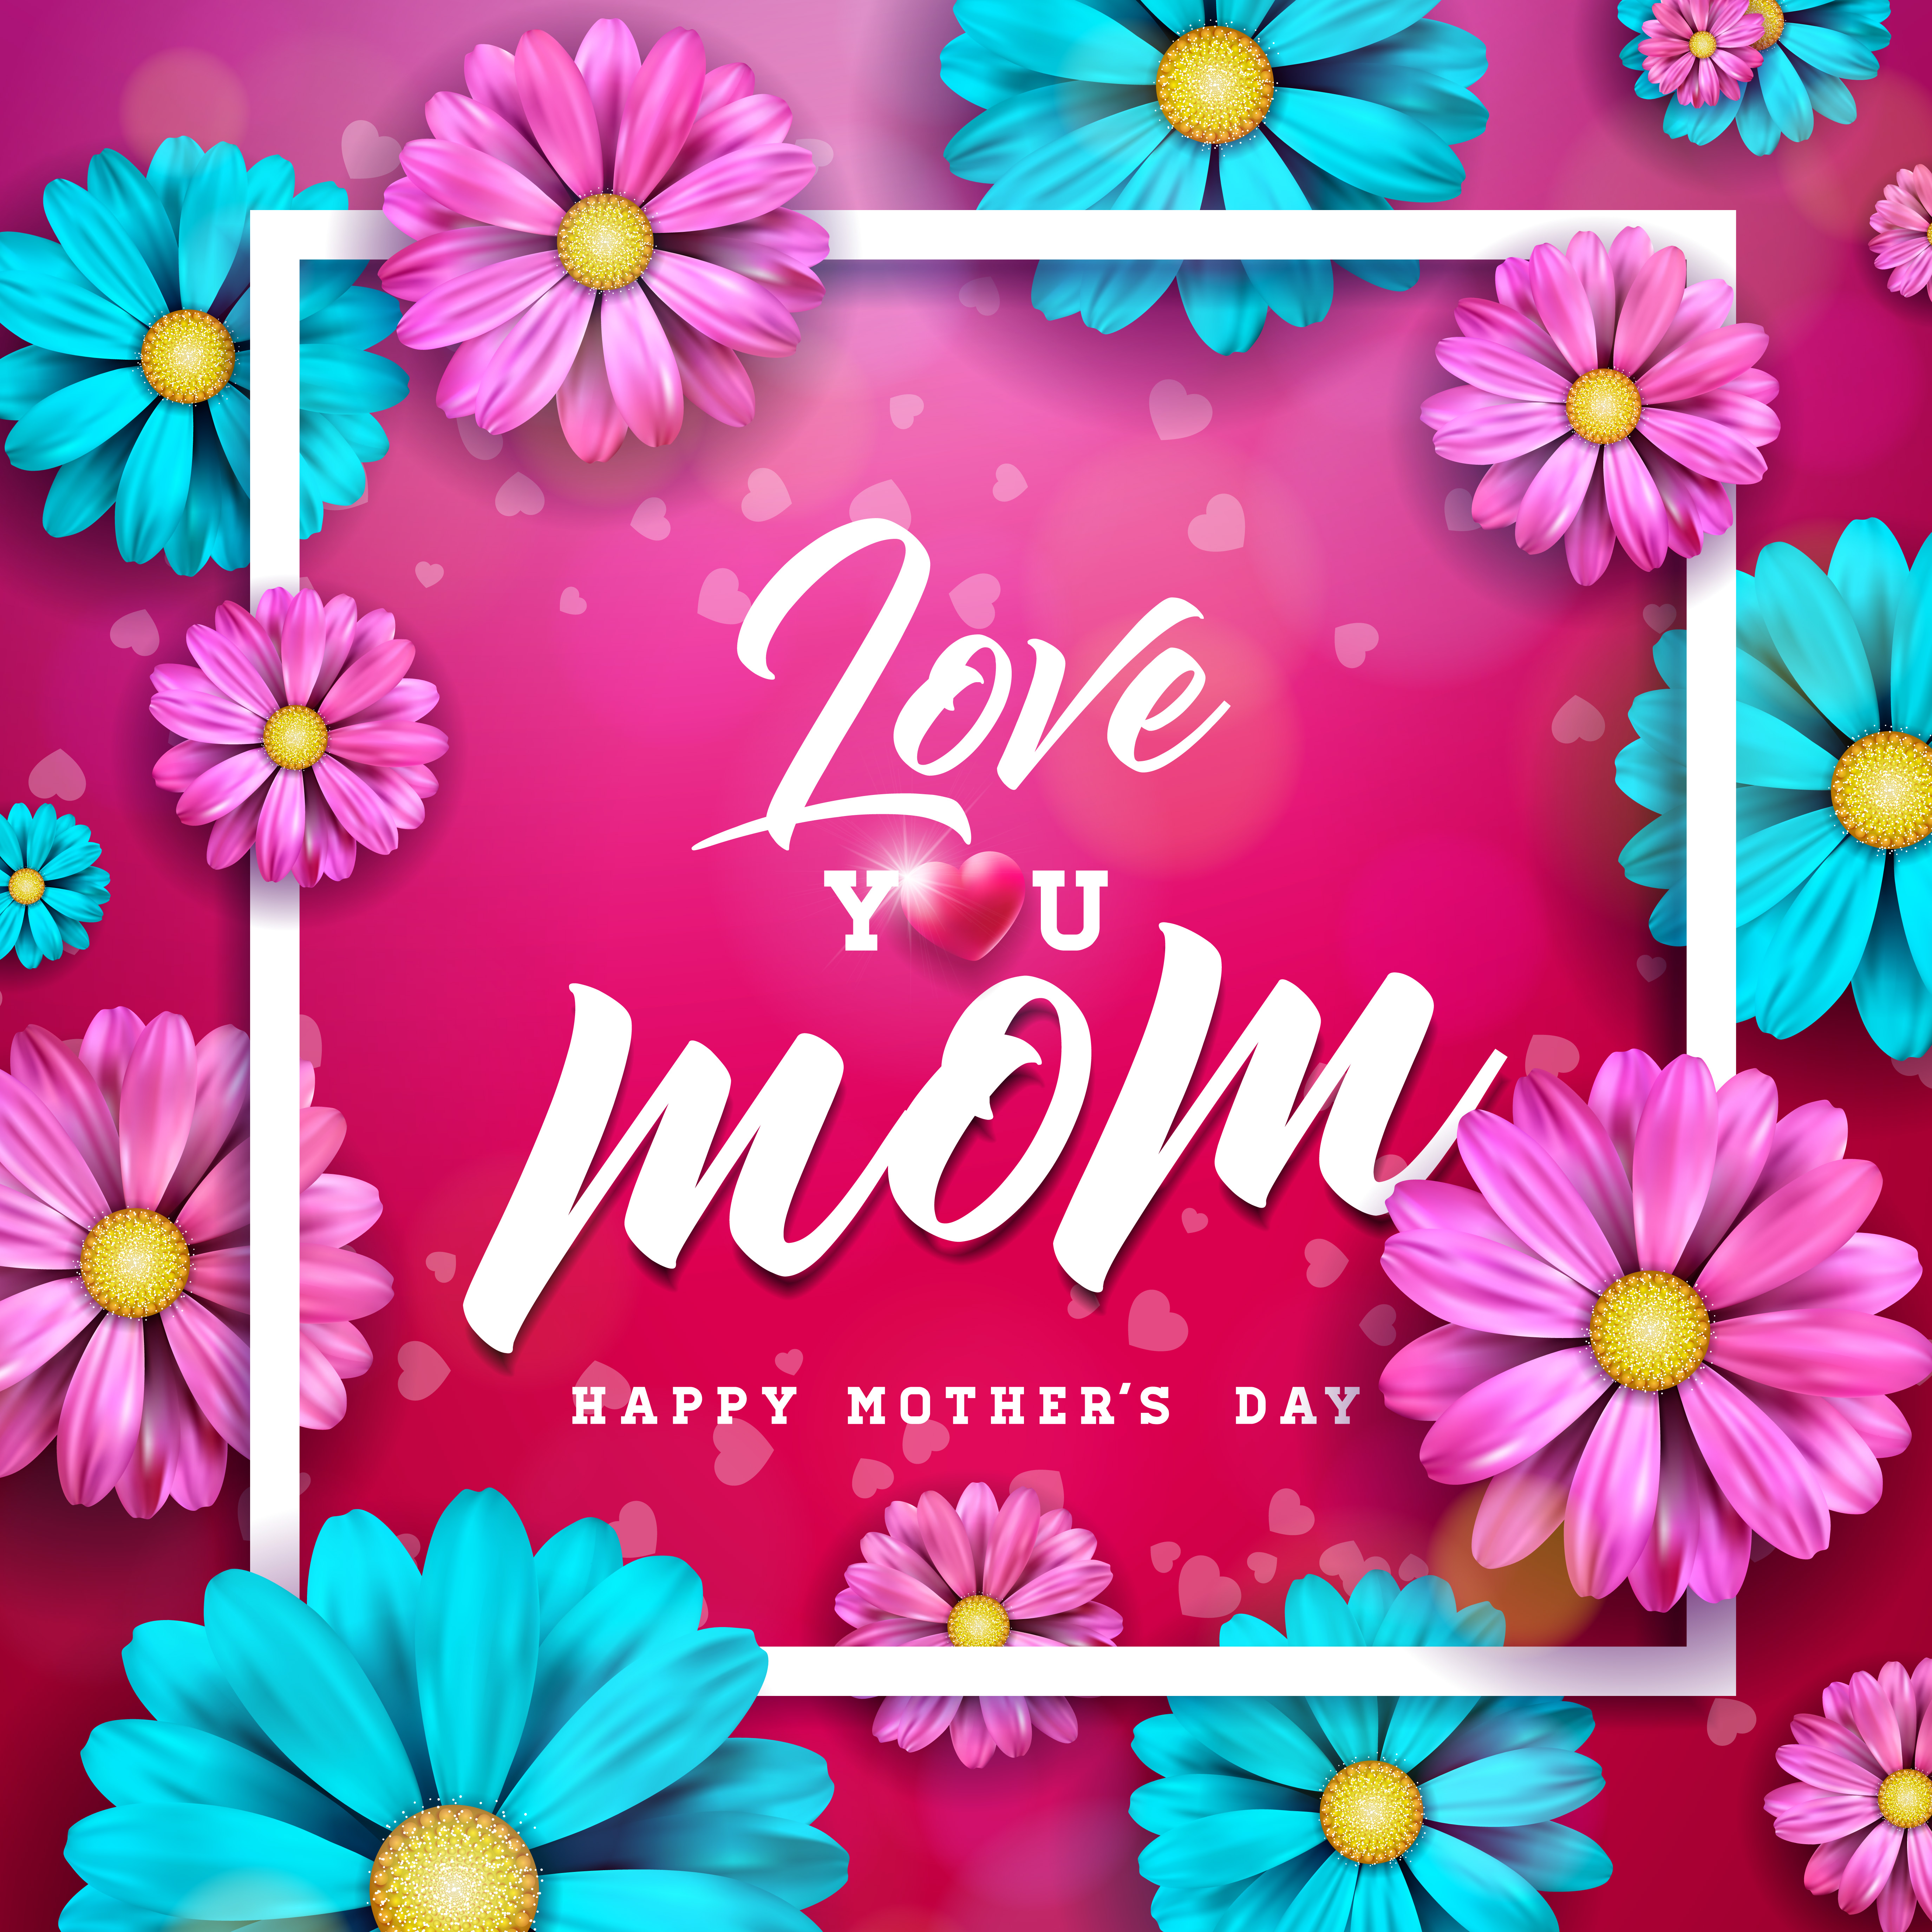 mothers day flower images free download